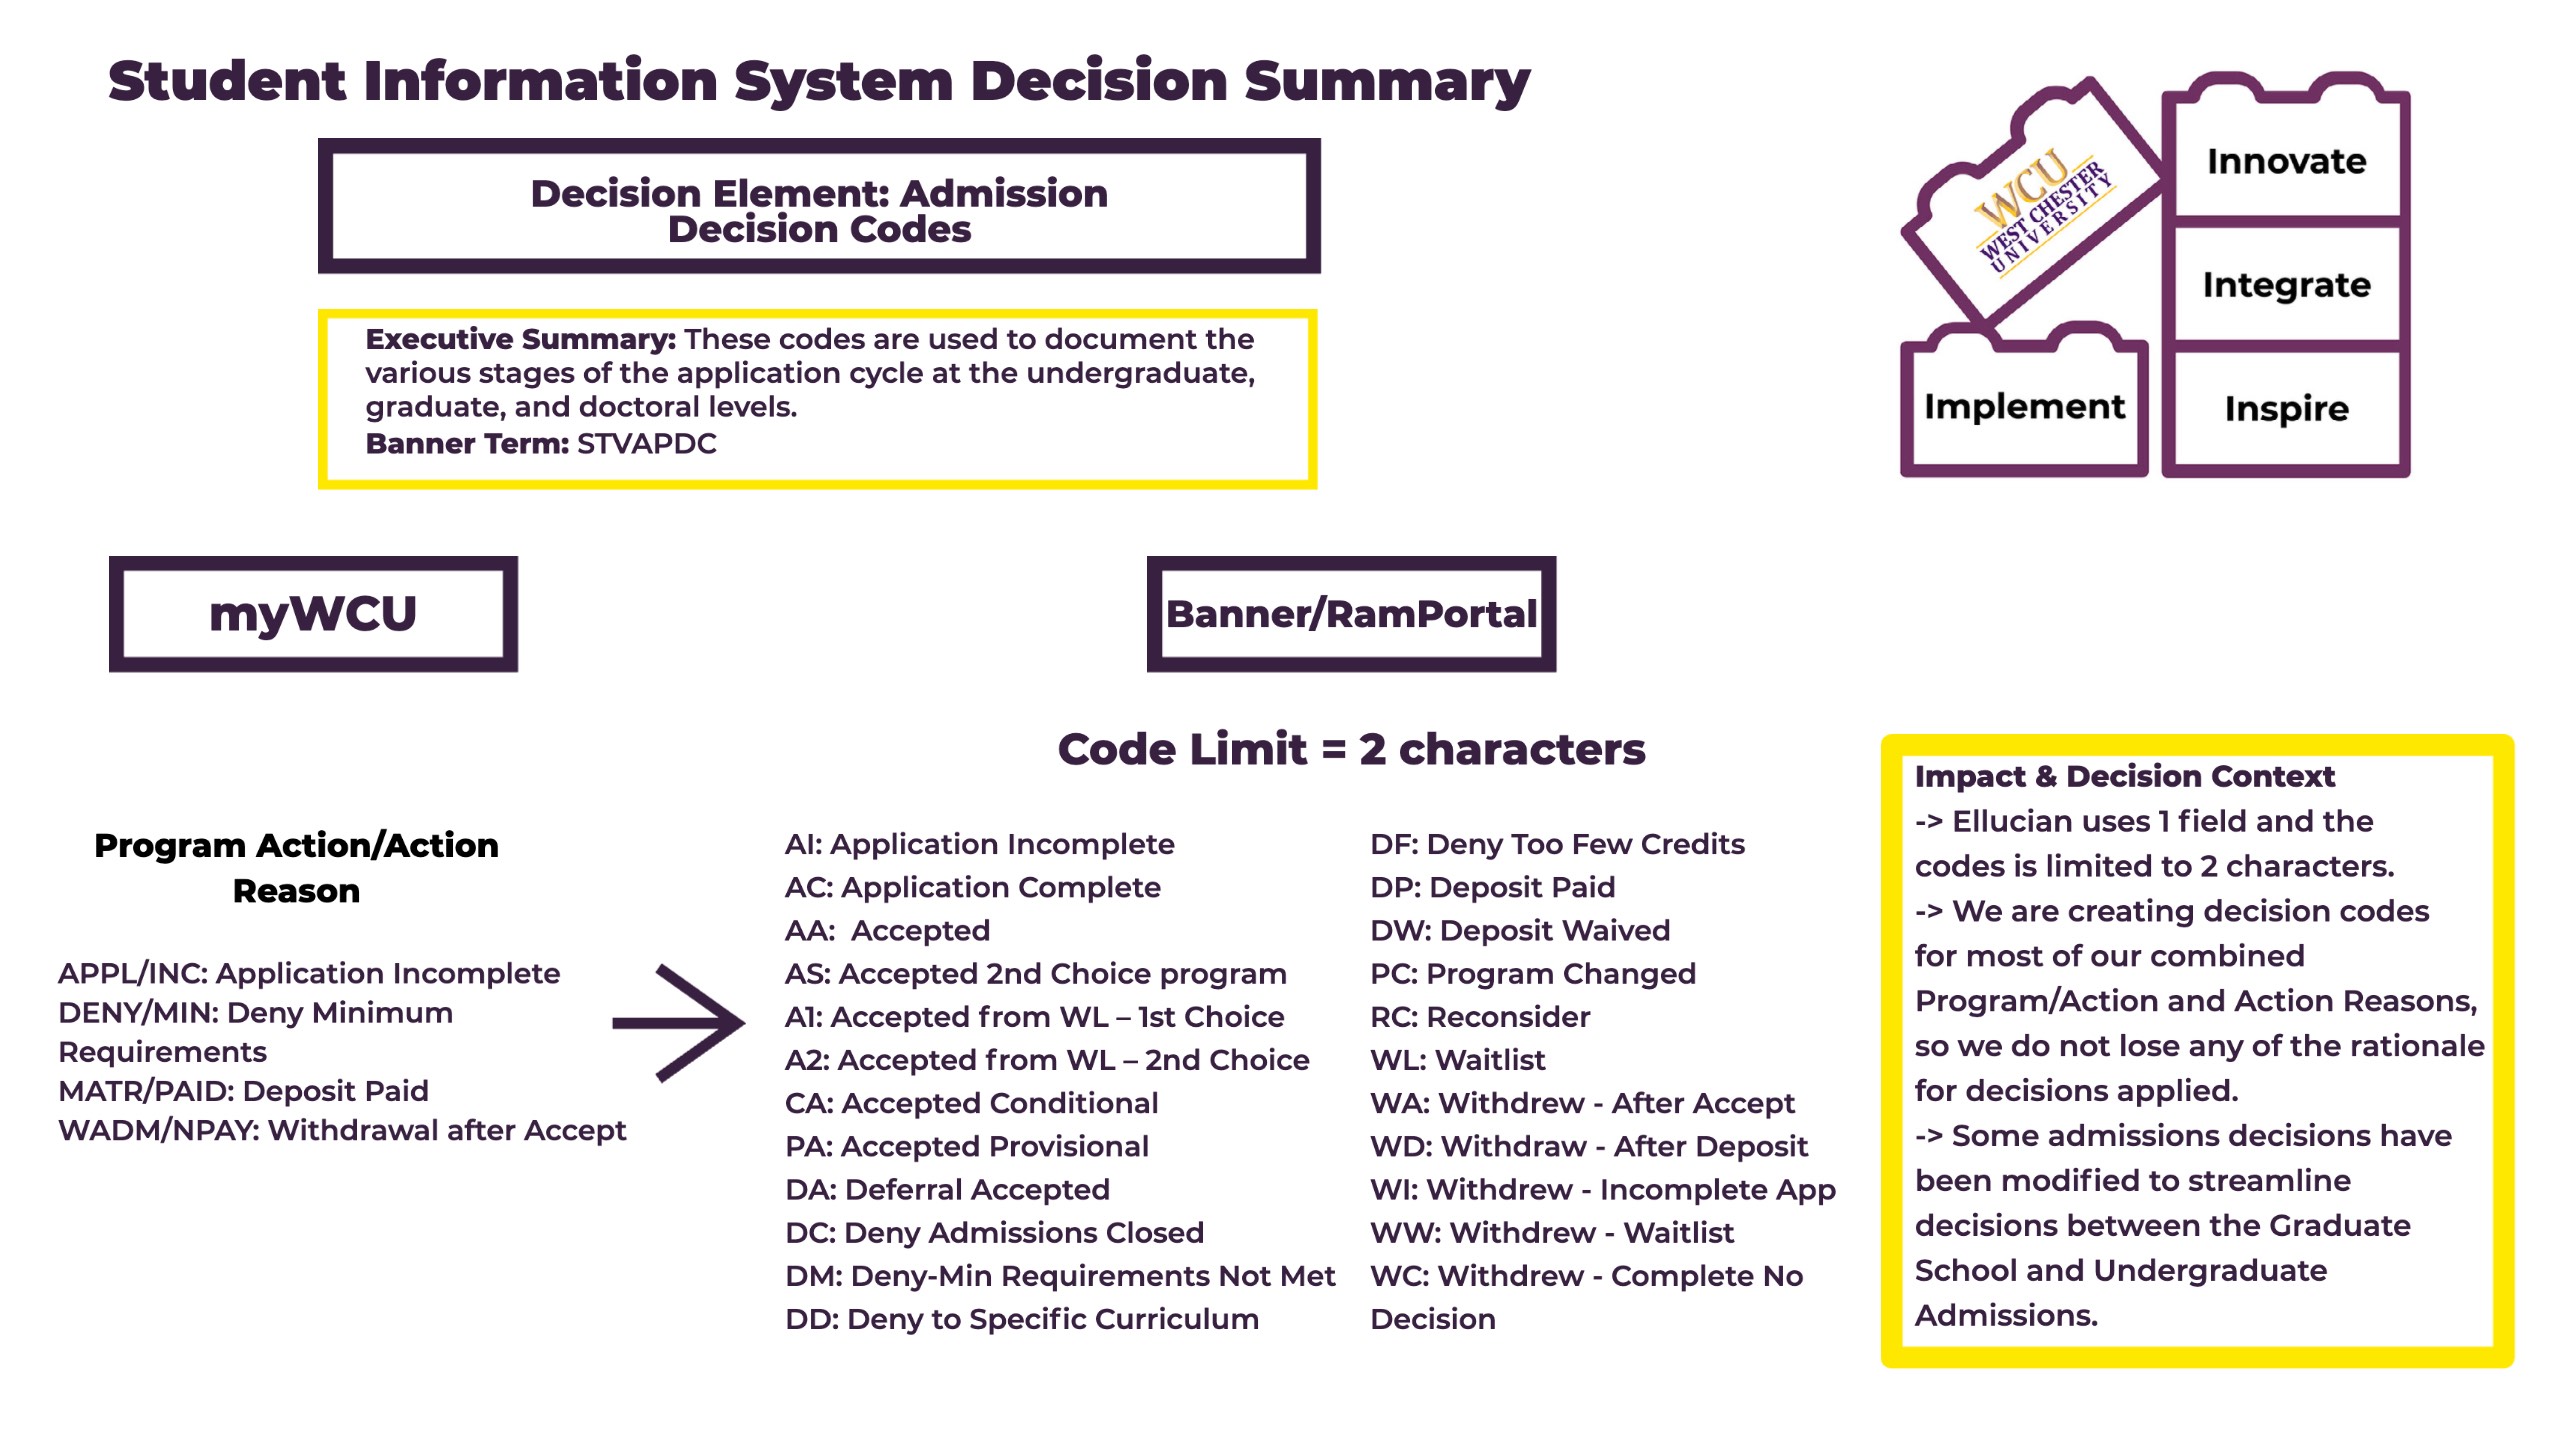  Student Information System Decision Summary Decision Element: Admission Decision Codes Executive Summary: These codes are used to document the various stages of the application cycle at the undergraduate, graduate, and doctoral levels. Banner Term: STVAPDC myWCU Banner/RamPortal WCU WEST CHESTER UNIVERSITY Innovate Implement Integrate Inspire Program Action/Action Reason APPL/INC: Application Incomplete DENY/MIN: Deny Minimum Requirements MATR/PAID: Deposit Paid WADM/NPAY: Withdrawal after Accept Code Limit = 2 characters Al: Application Incomplete AC: Application Complete AA: Accepted AS: Accepted 2nd Choice program Al: Accepted from WL - 1st Choice A2: Accepted from WL - 2nd Choice CA: Accepted Conditional PA: Accepted Provisional DA: Deferral Accepted DC: Deny Admissions Closed DM: Deny-Min Requirements Not Met DD: Deny to Specific Curriculum DF: Deny Too Few Credits DP: Deposit Paid DW: Deposit Waived PC: Program Changed RC: Reconsider WL: Waitlist WA: Withdrew - After Accept WD: Withdraw - After Deposit WI: Withdrew - Incomplete App WW: Withdrew - Waitlist WC: Withdrew - Complete No Decision Impact & Decision Context -> Ellucian uses 1 field and the codes is limited to 2 characters. -> We are creating decision codes for most of our combined Program/Action and Action Reasons, so we do not lose any of the rationale for decisions applied. -> Some admissions decisions have been modified to streamline decisions between the Graduate School and Undergraduate Admissions.